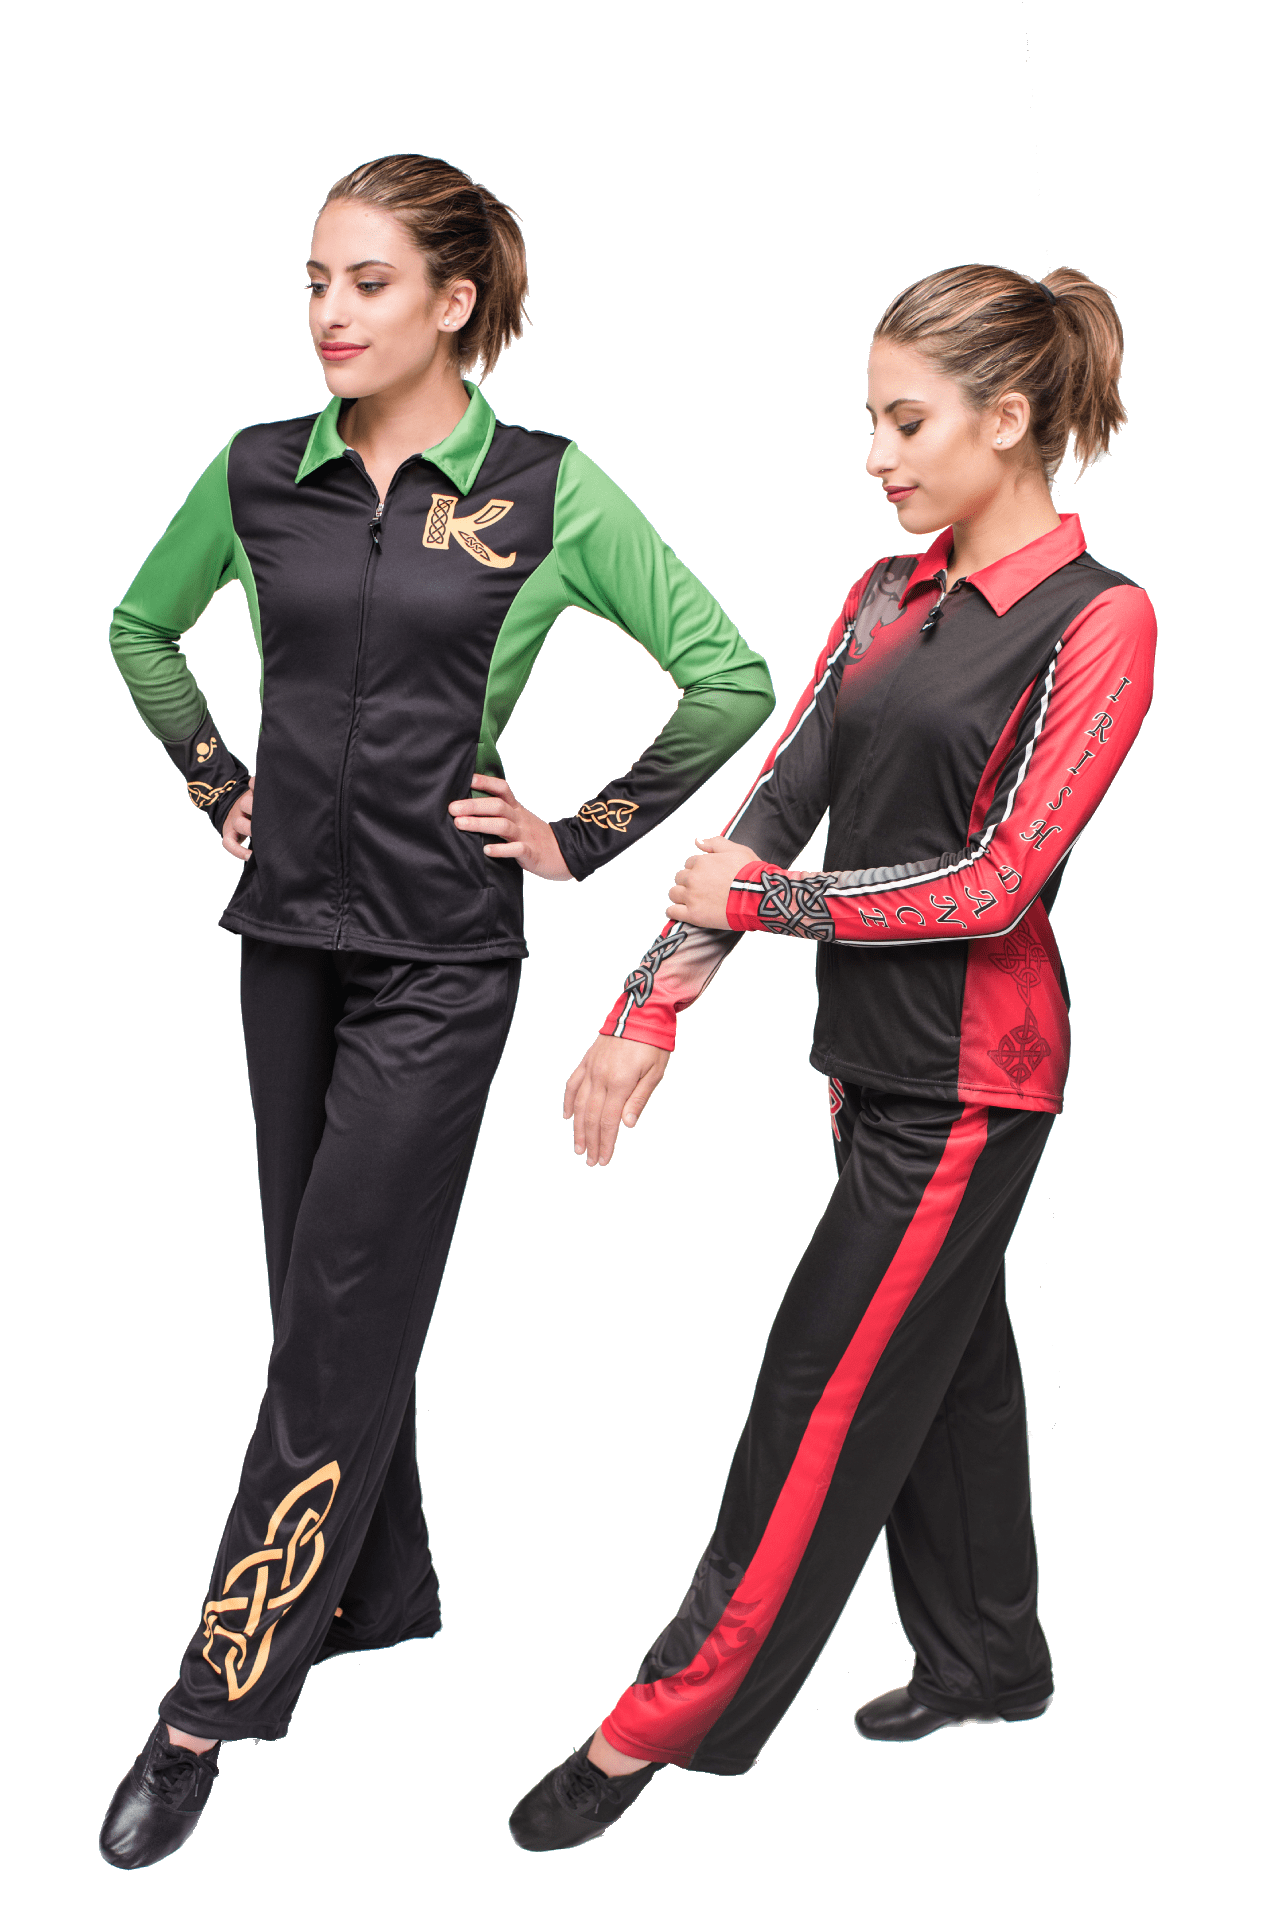 Custom-made Irish Dance Jacket in black, and pink with star pattern across the chest